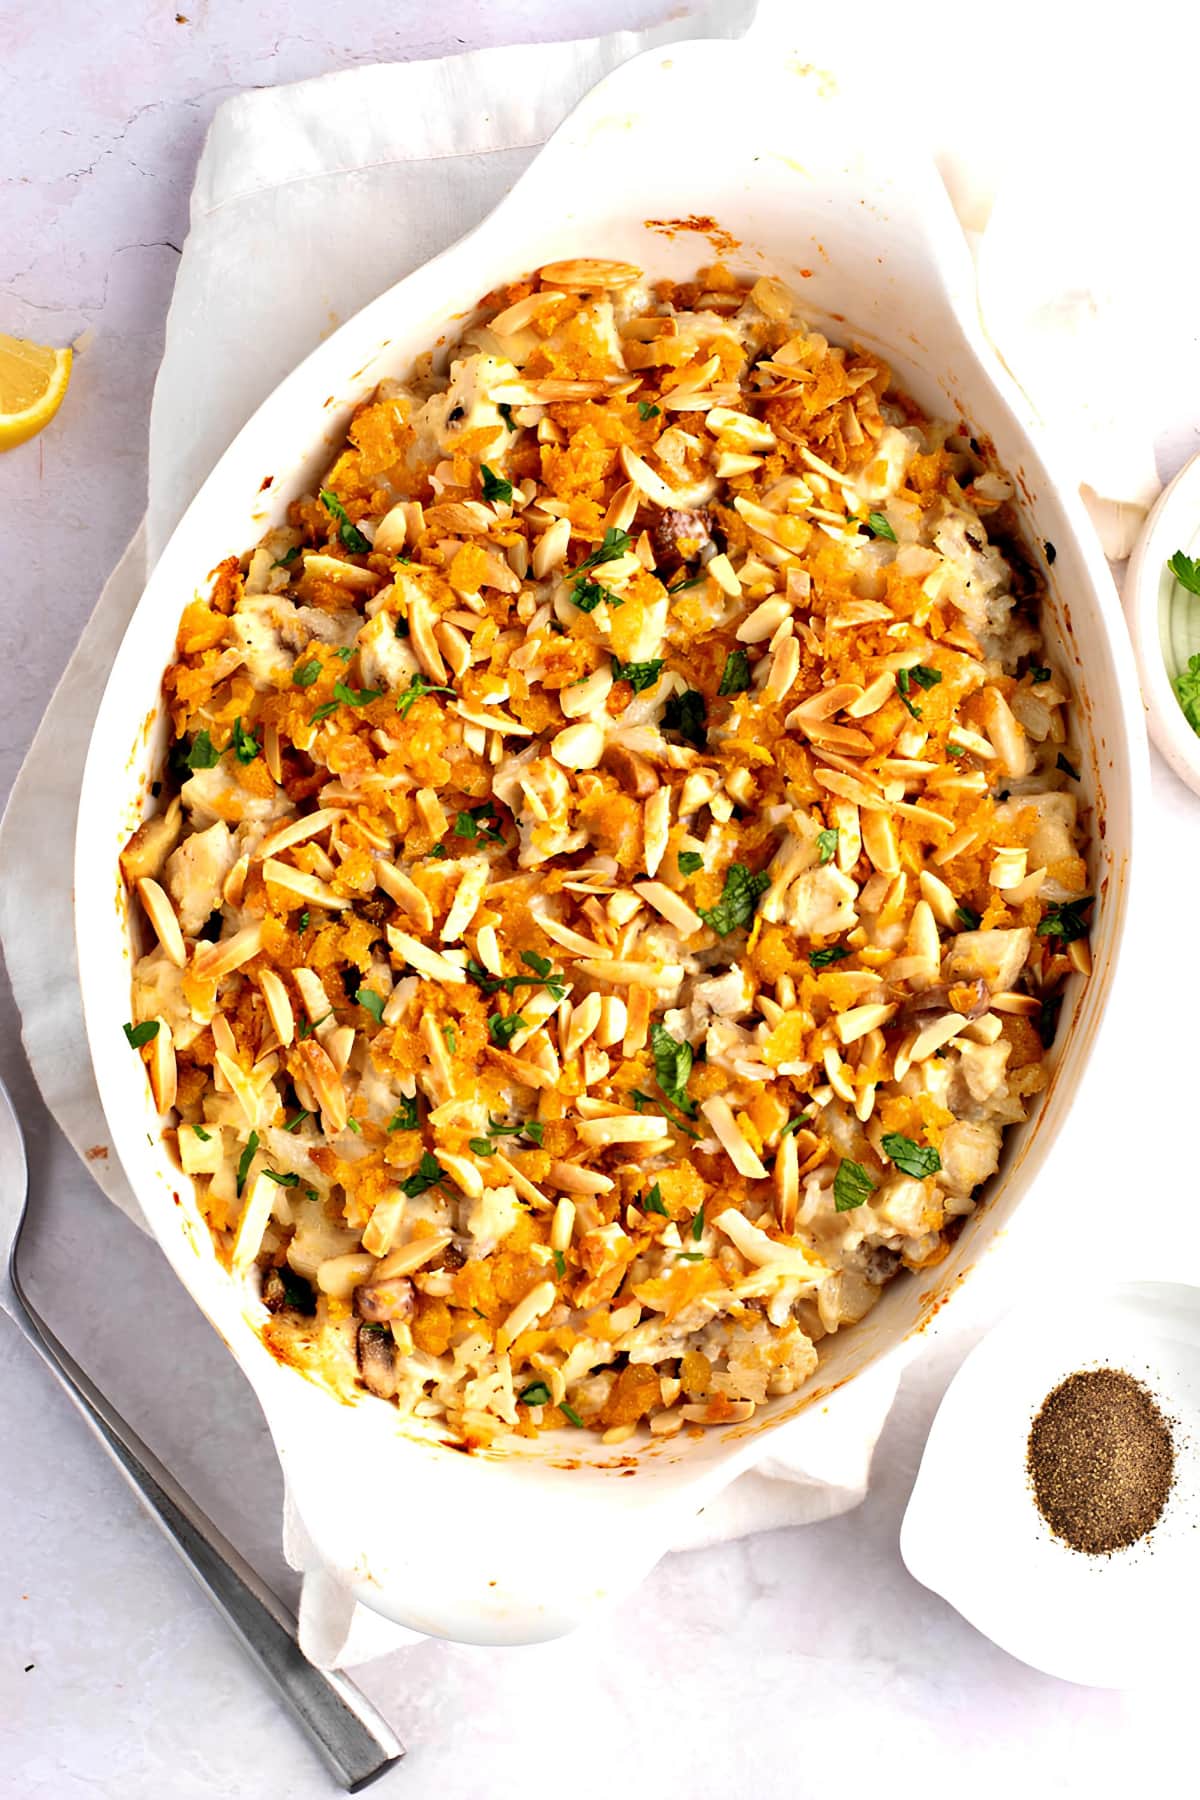 A casserole dish with a delicious blend of rice and tender chicken, cooked to perfection.